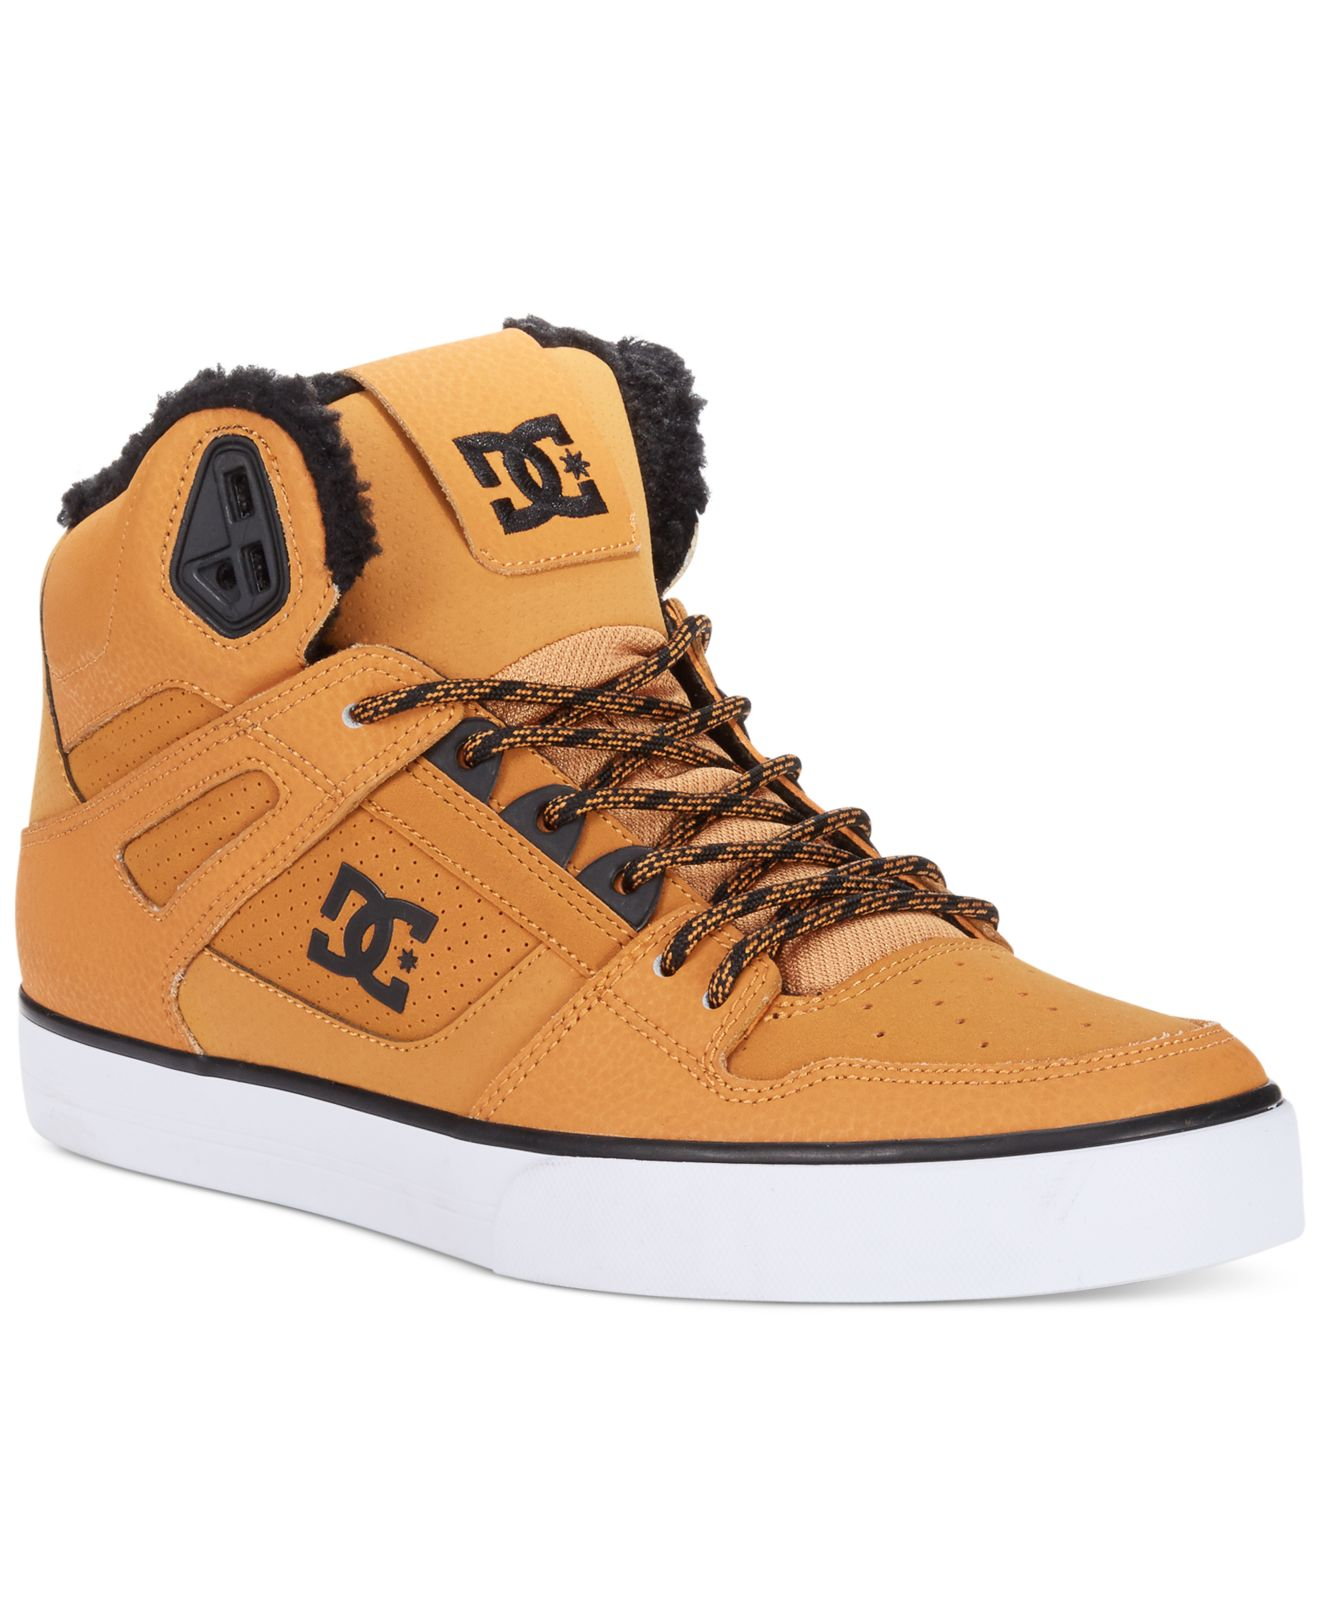 Lyst Dc  Shoes  Spartan Hi Wc Wnt Sherpa Lined Sneakers  in 